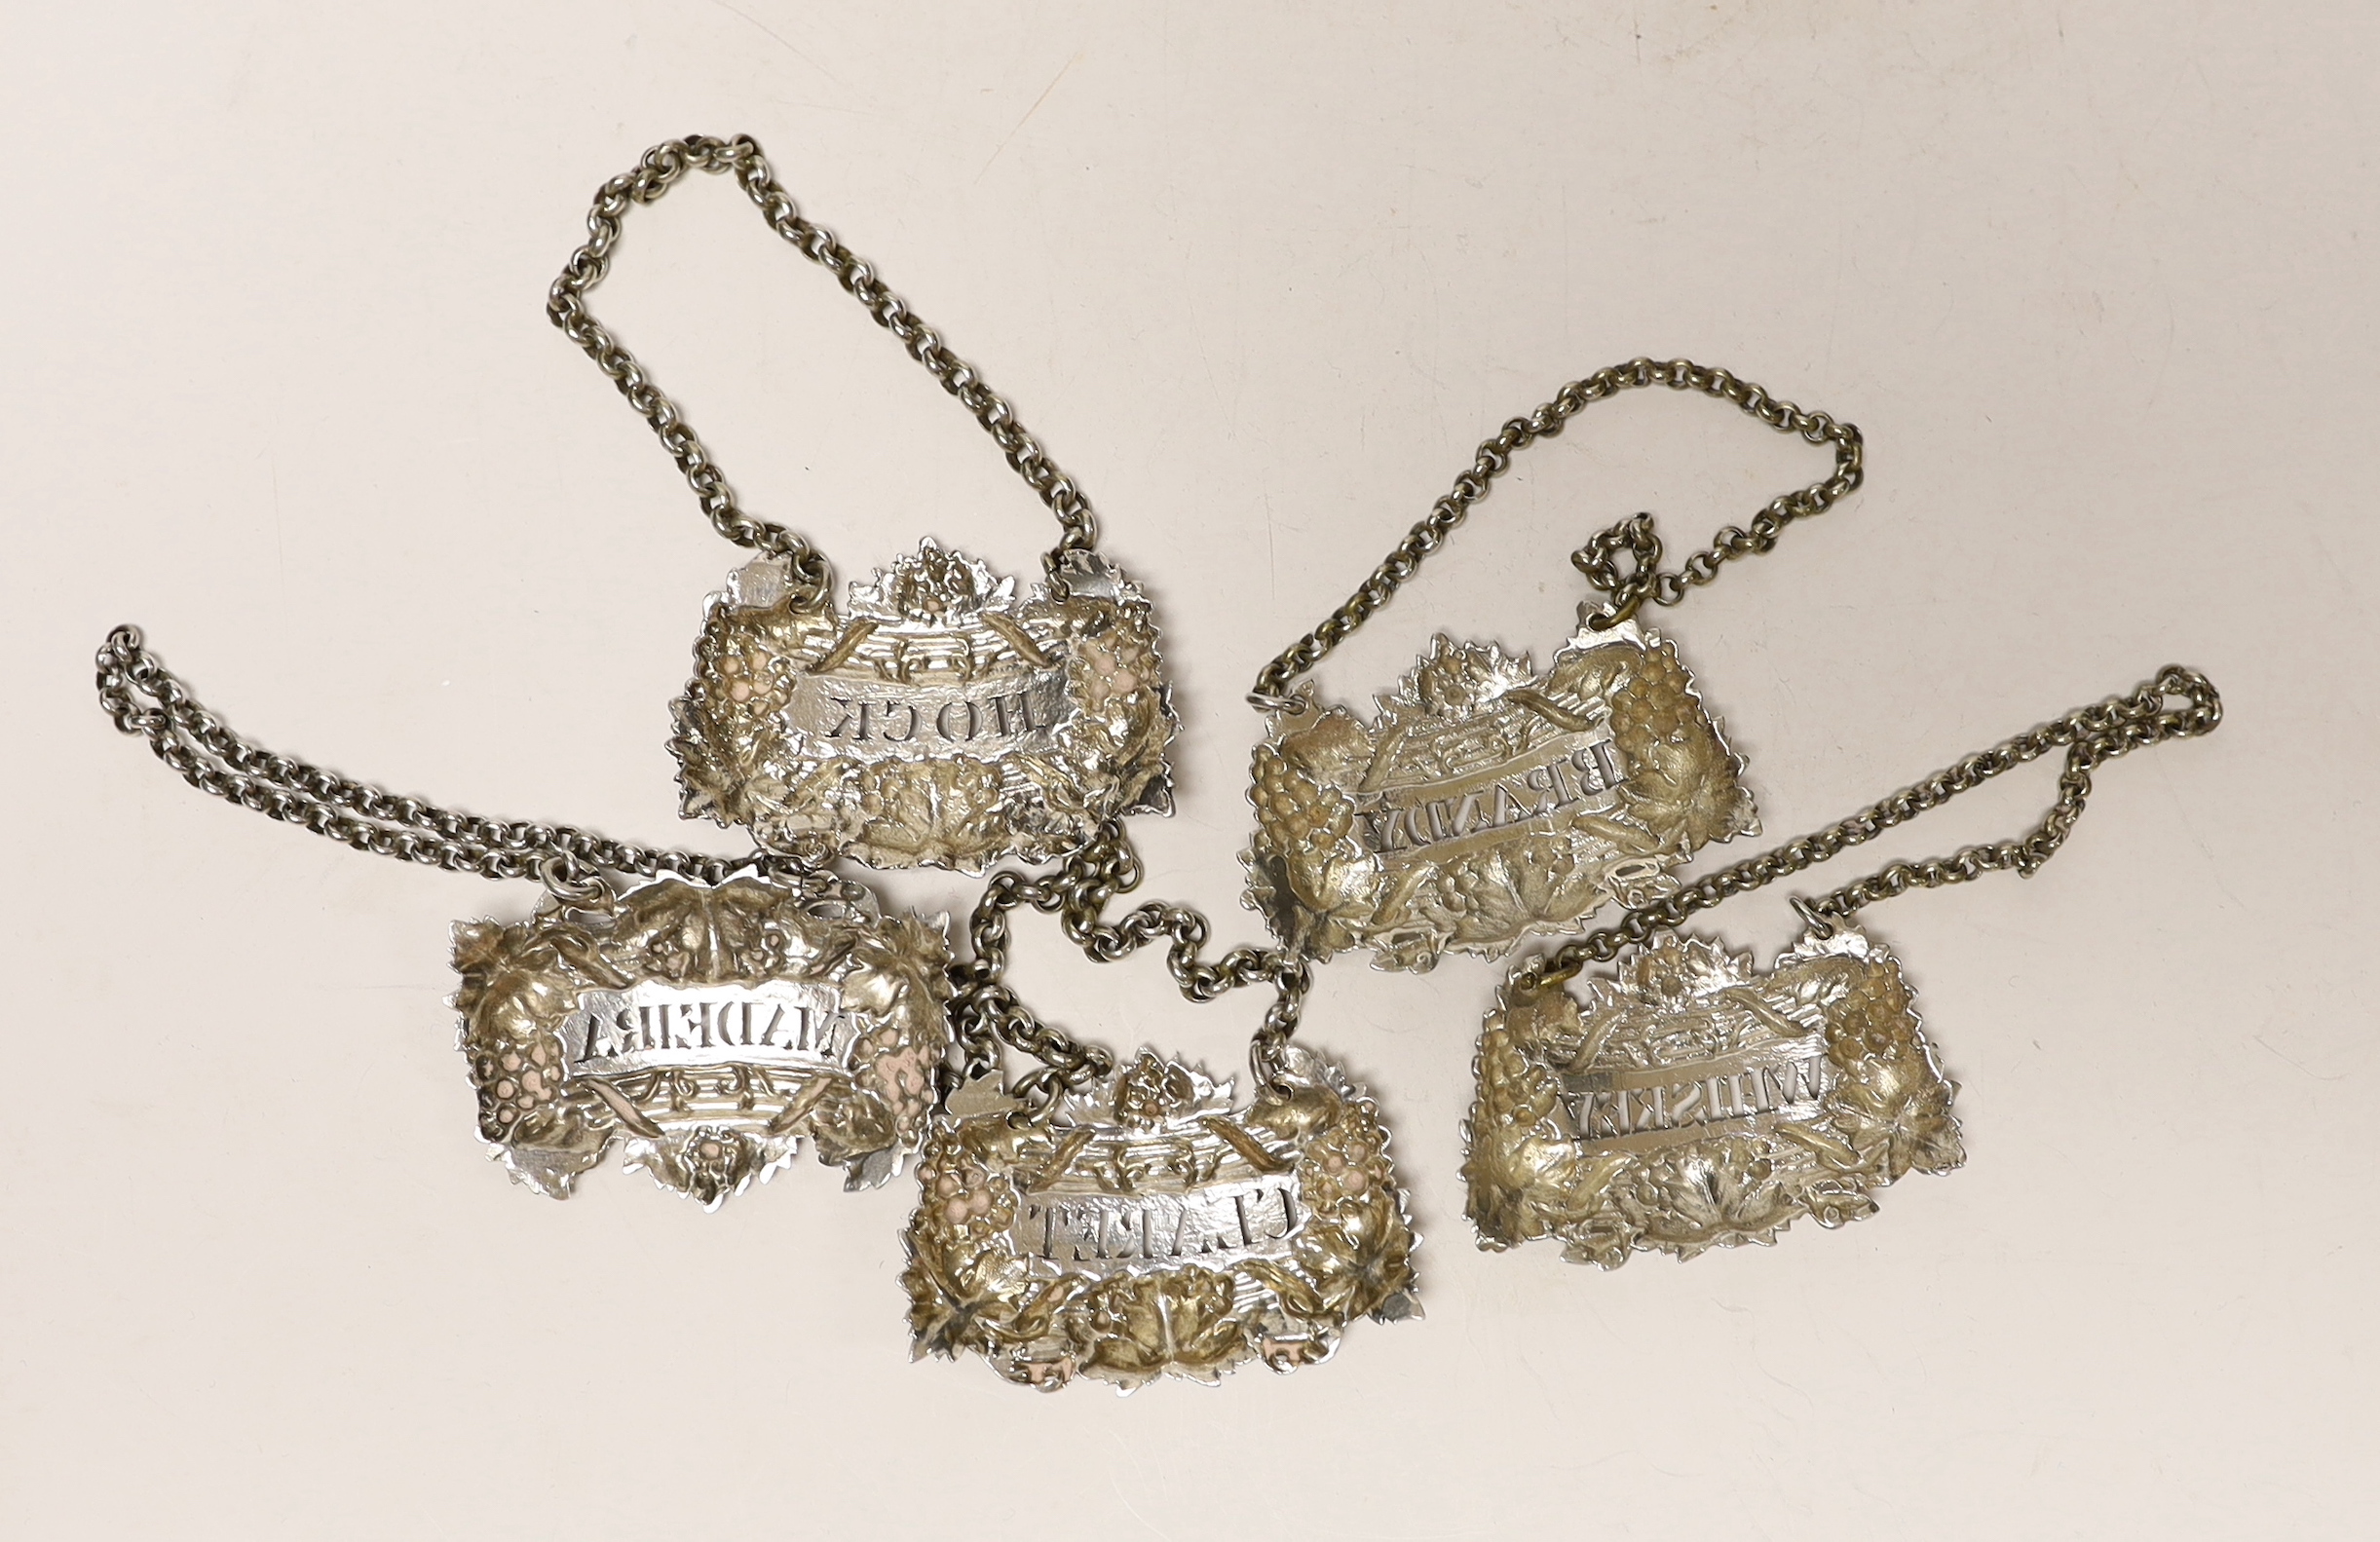 A matched set of five early 19th century ornate silver fruiting vine wine labels, Emes & Barnard, London, 1825/1827(2), Reily & Storer 1829 and 1850(2), width 6cm.